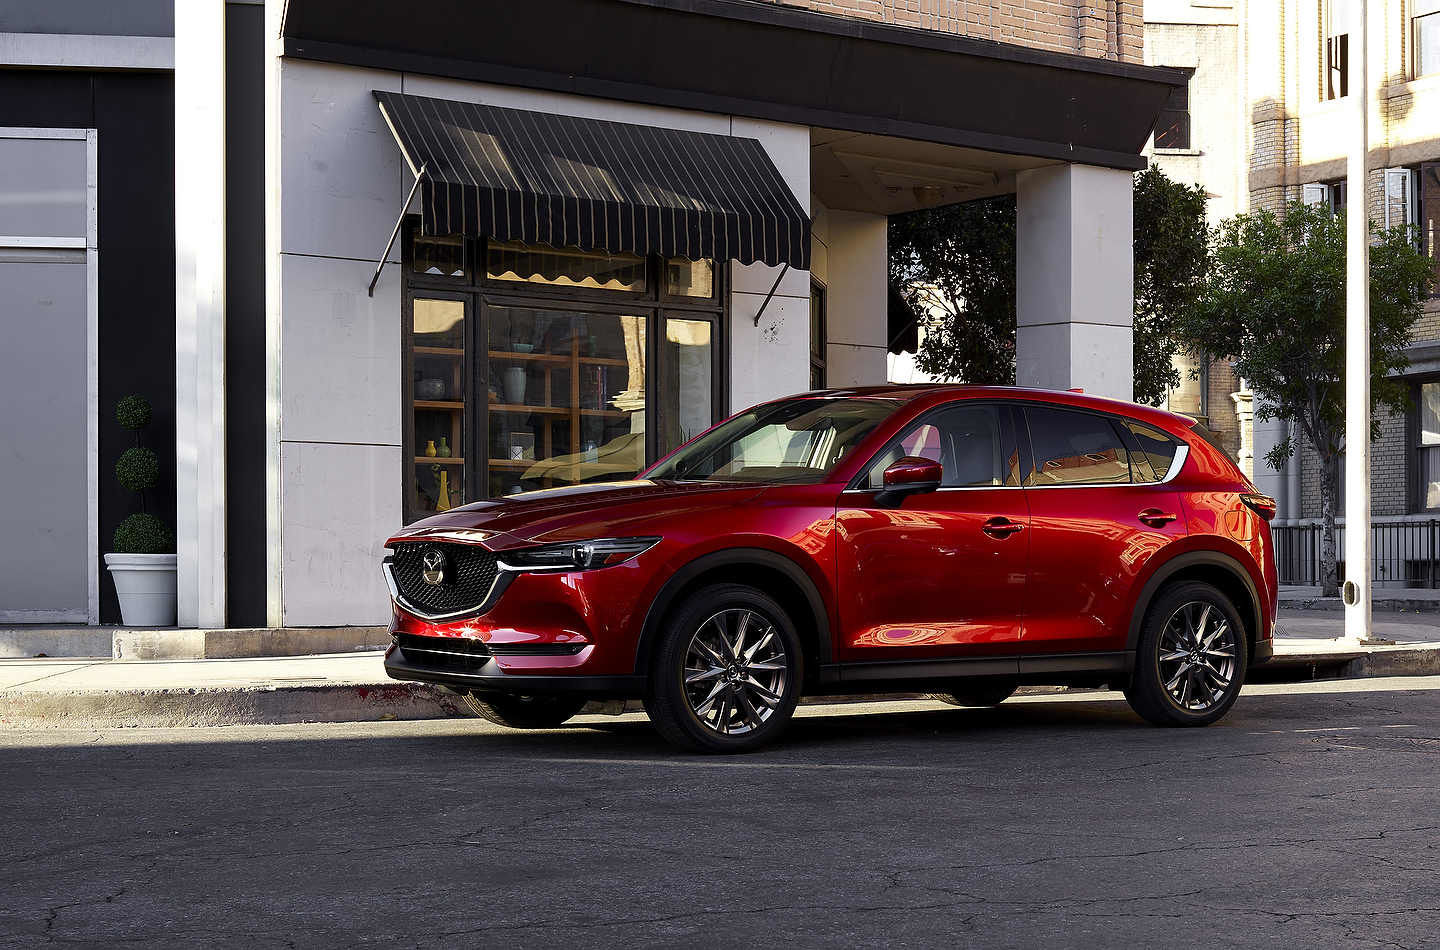 2021 Mazda CX-5 vs. 2021 Toyota RAV4: The Best of Style, Performance, and Technology